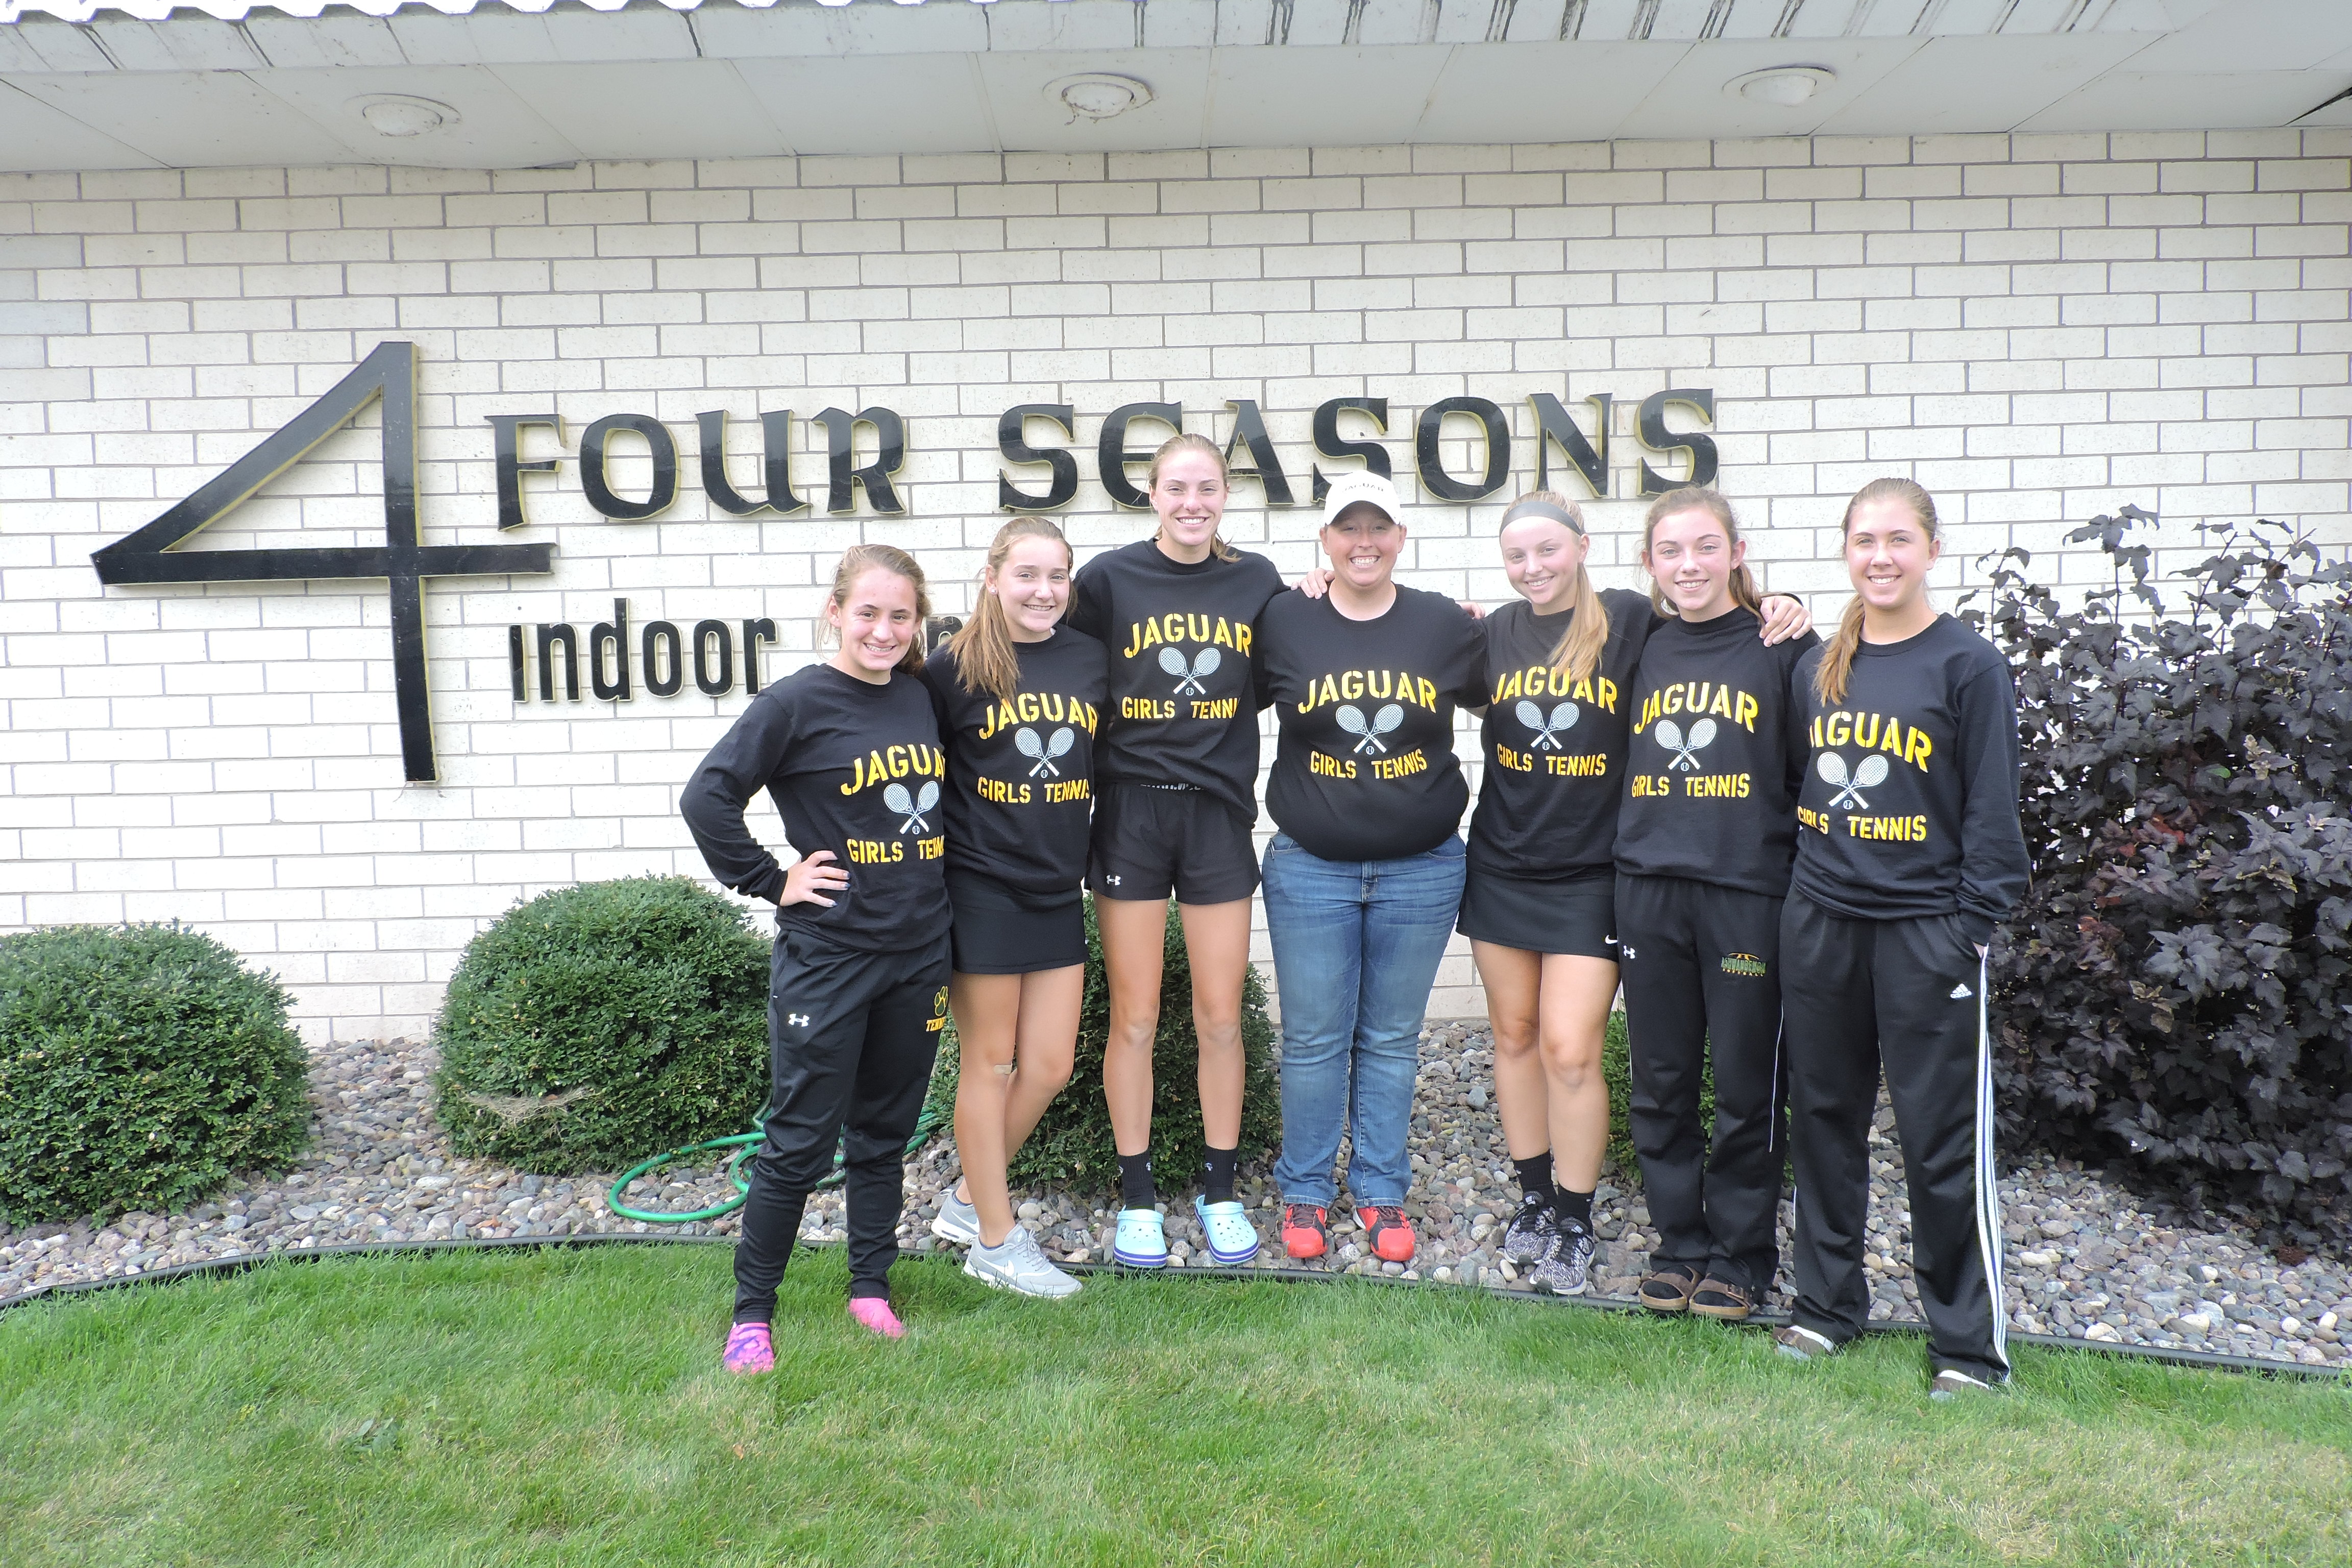 Jaguars advance 3 to Sectionals in girls tennis